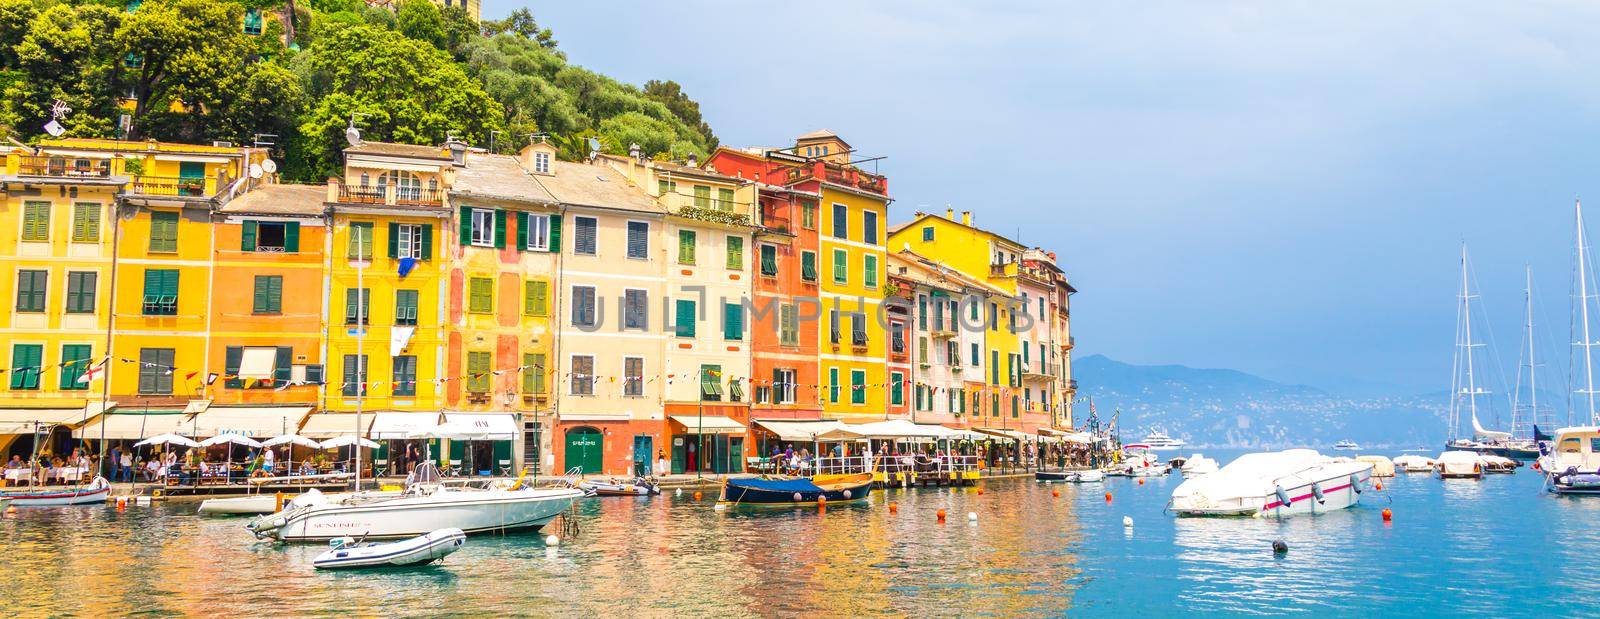 The beautiful Portofino with colorful houses and villas in Italy by Mariakray